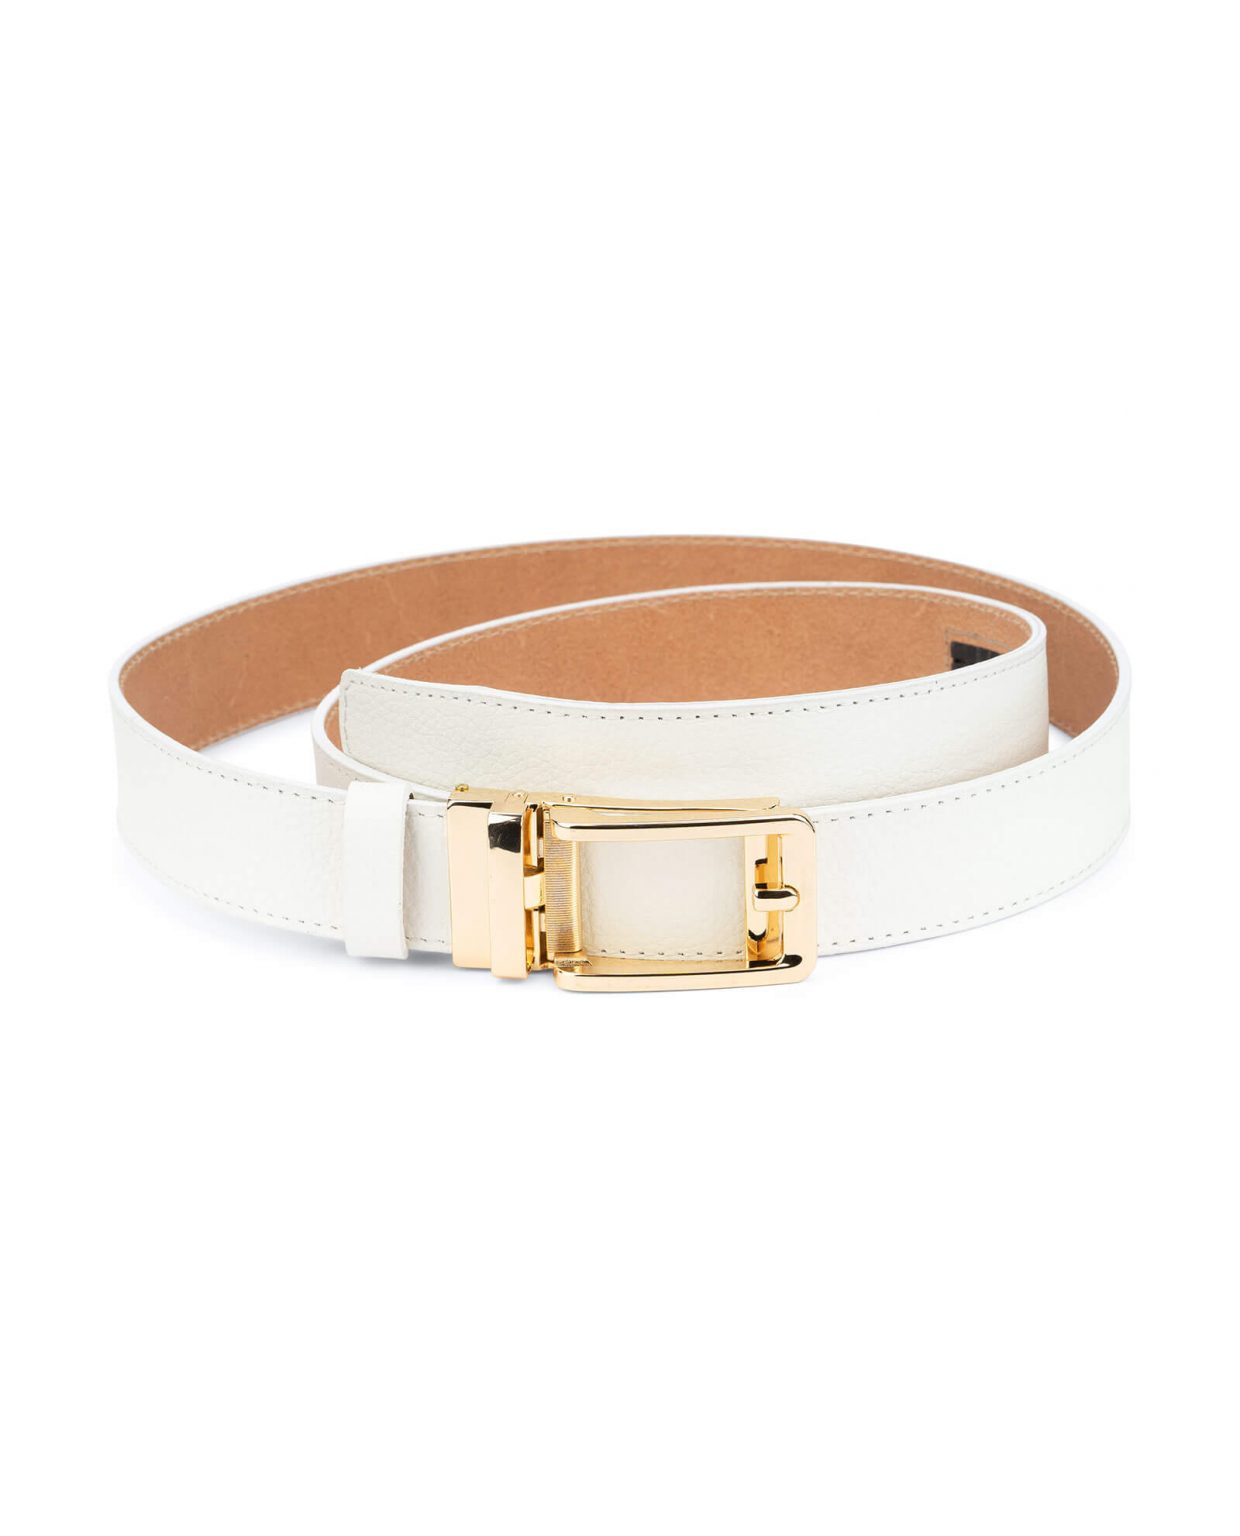 Buy Automatic Leather White Belt With Gold Buckle | LeatherBeltsOnline